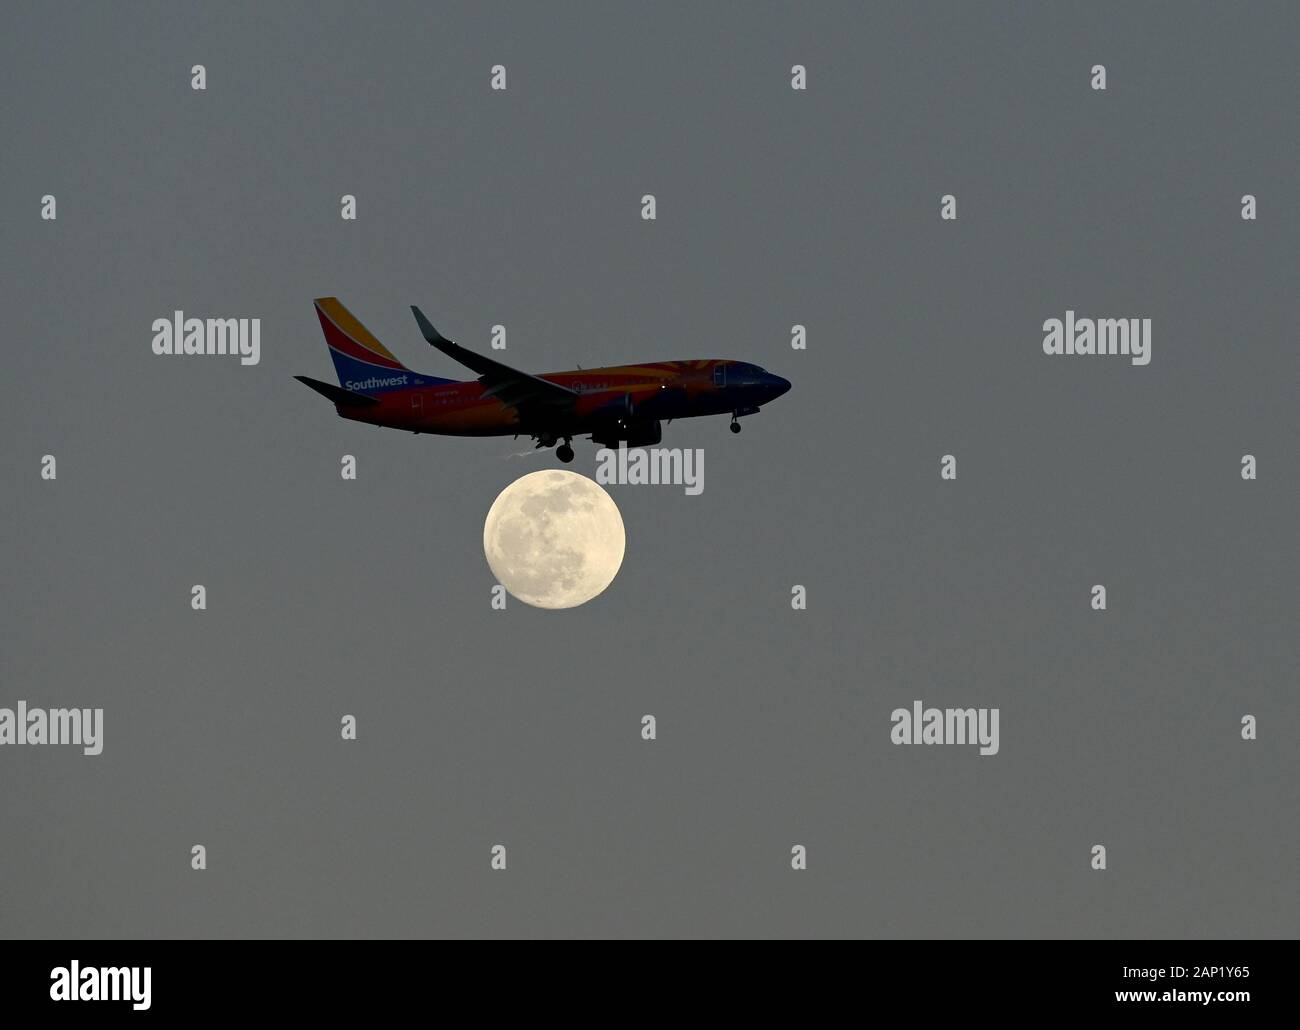 A Southwest Airlines Boeing 737-700 airplane lands over a full moon near Orlando International Airport or MCO. Stock Photo